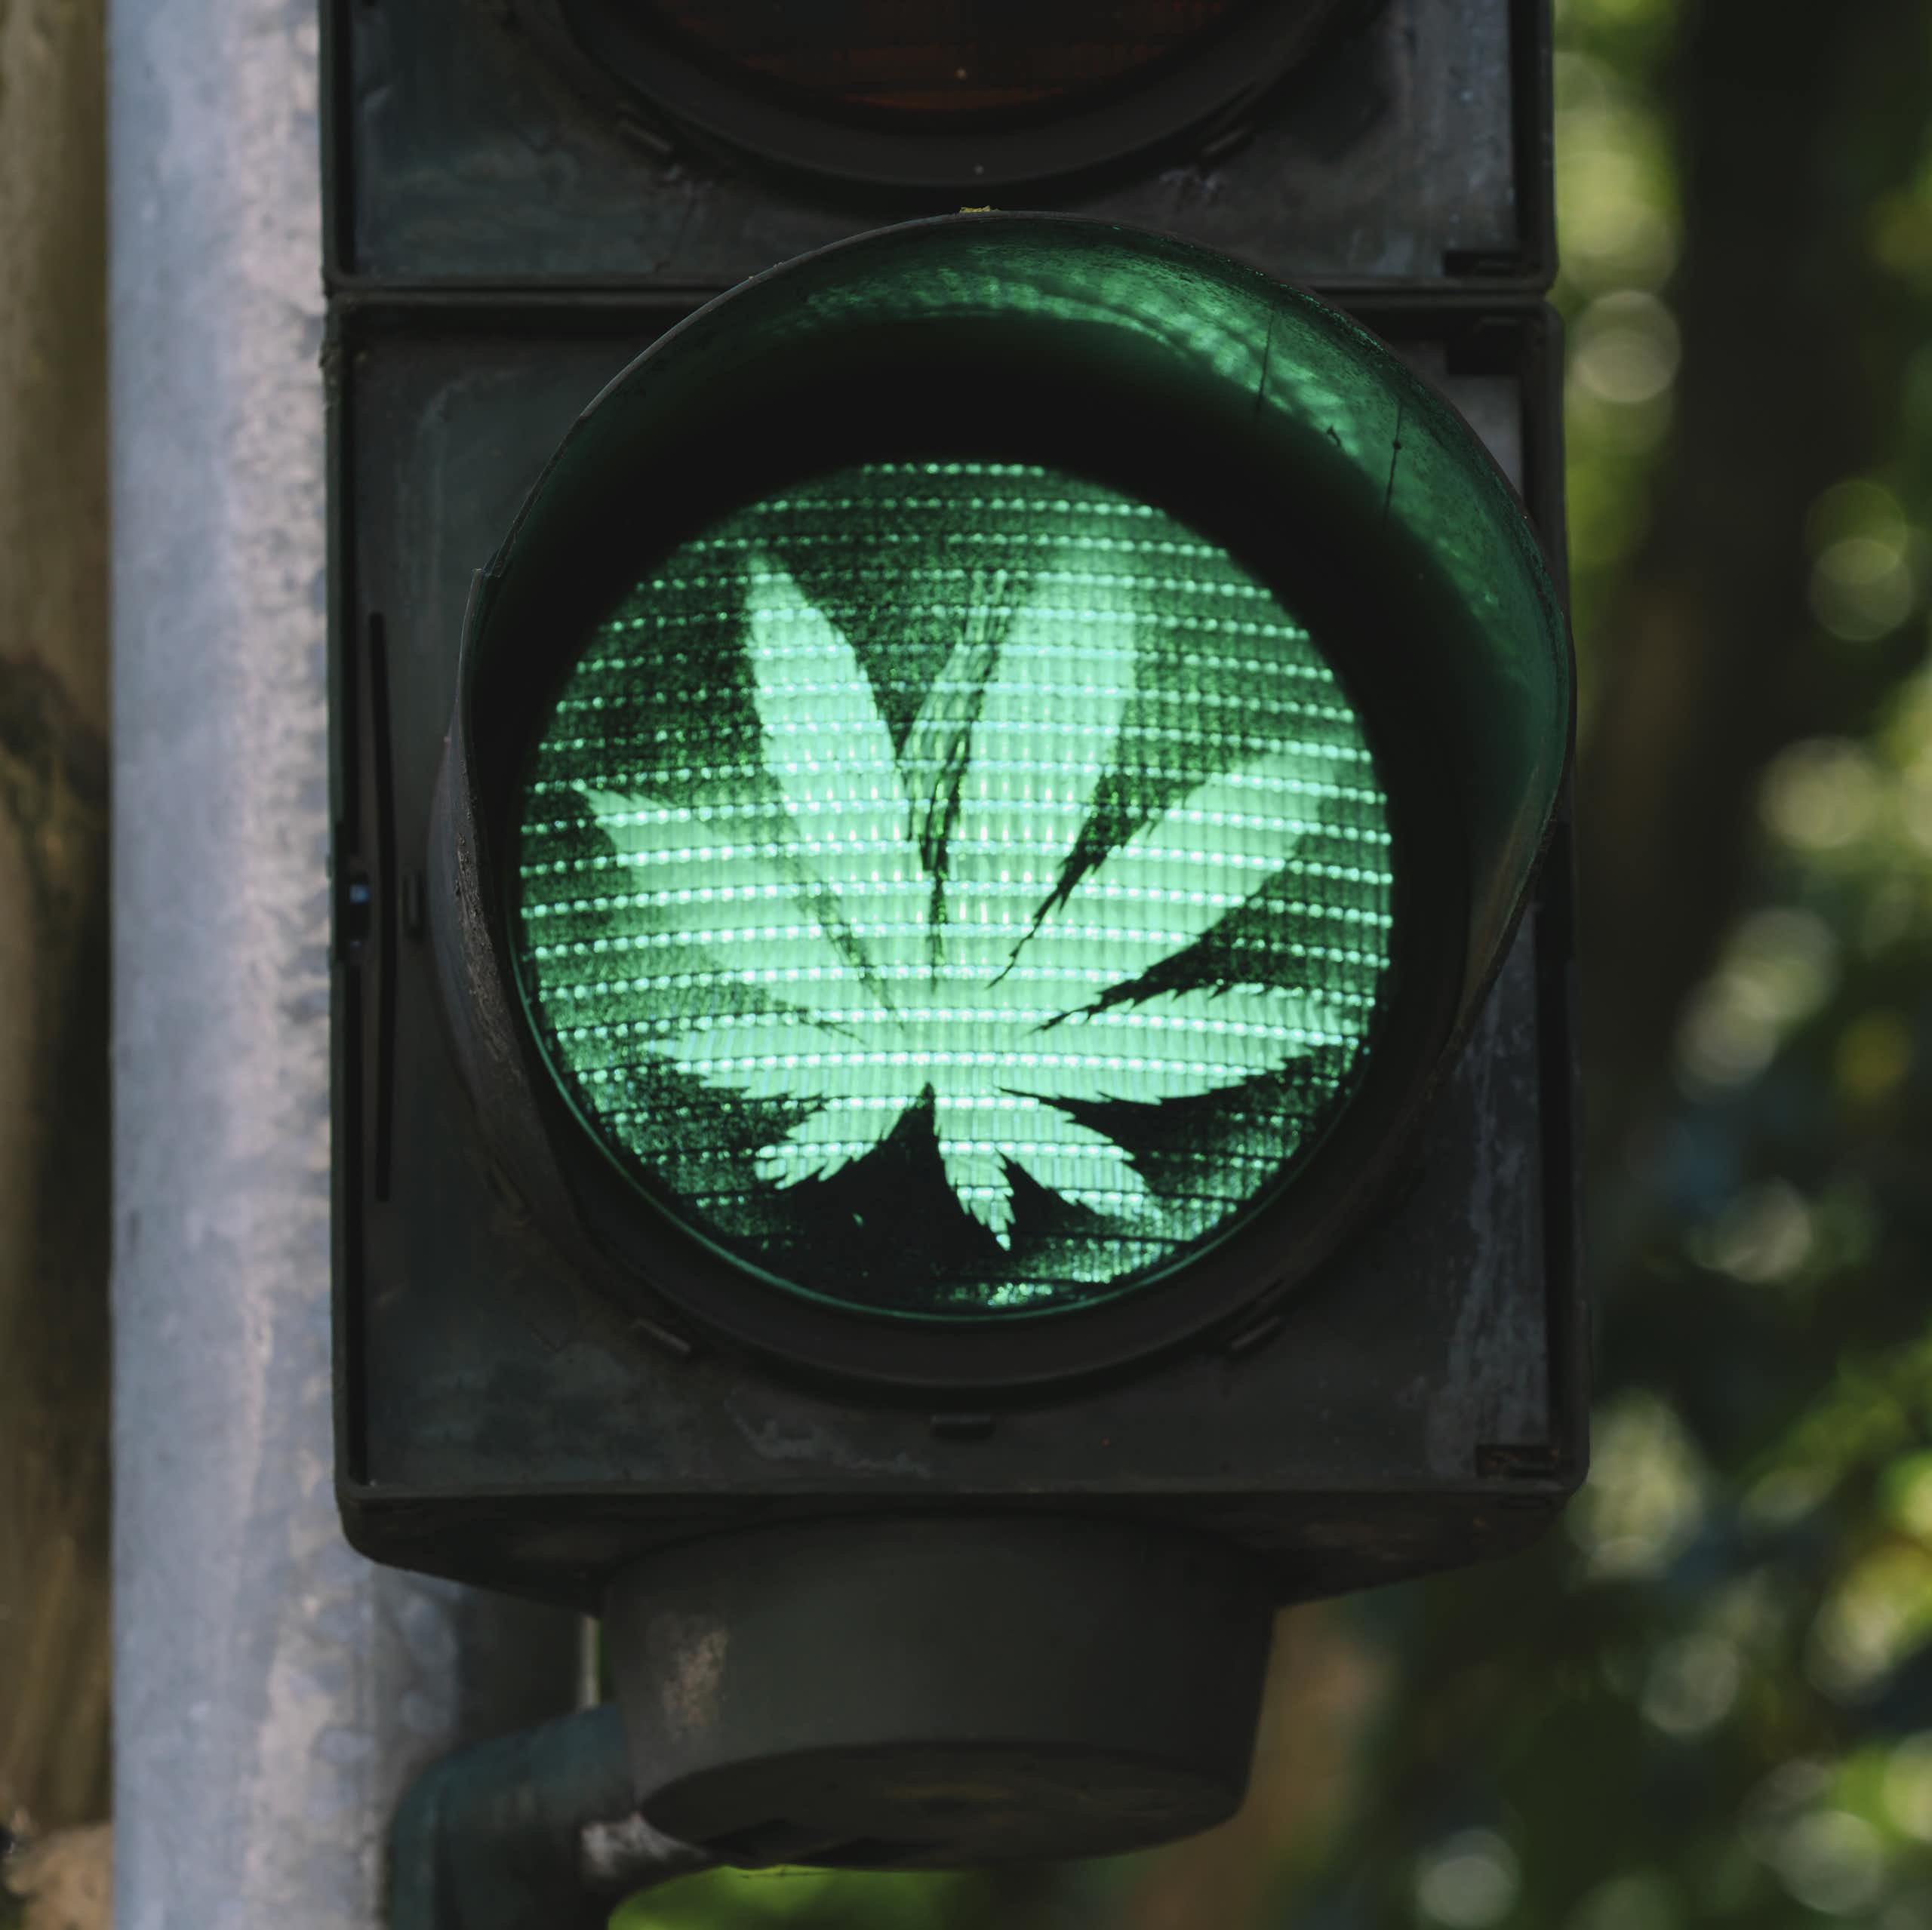 Germany decriminalised cannabis: why the UK should consider doing the same